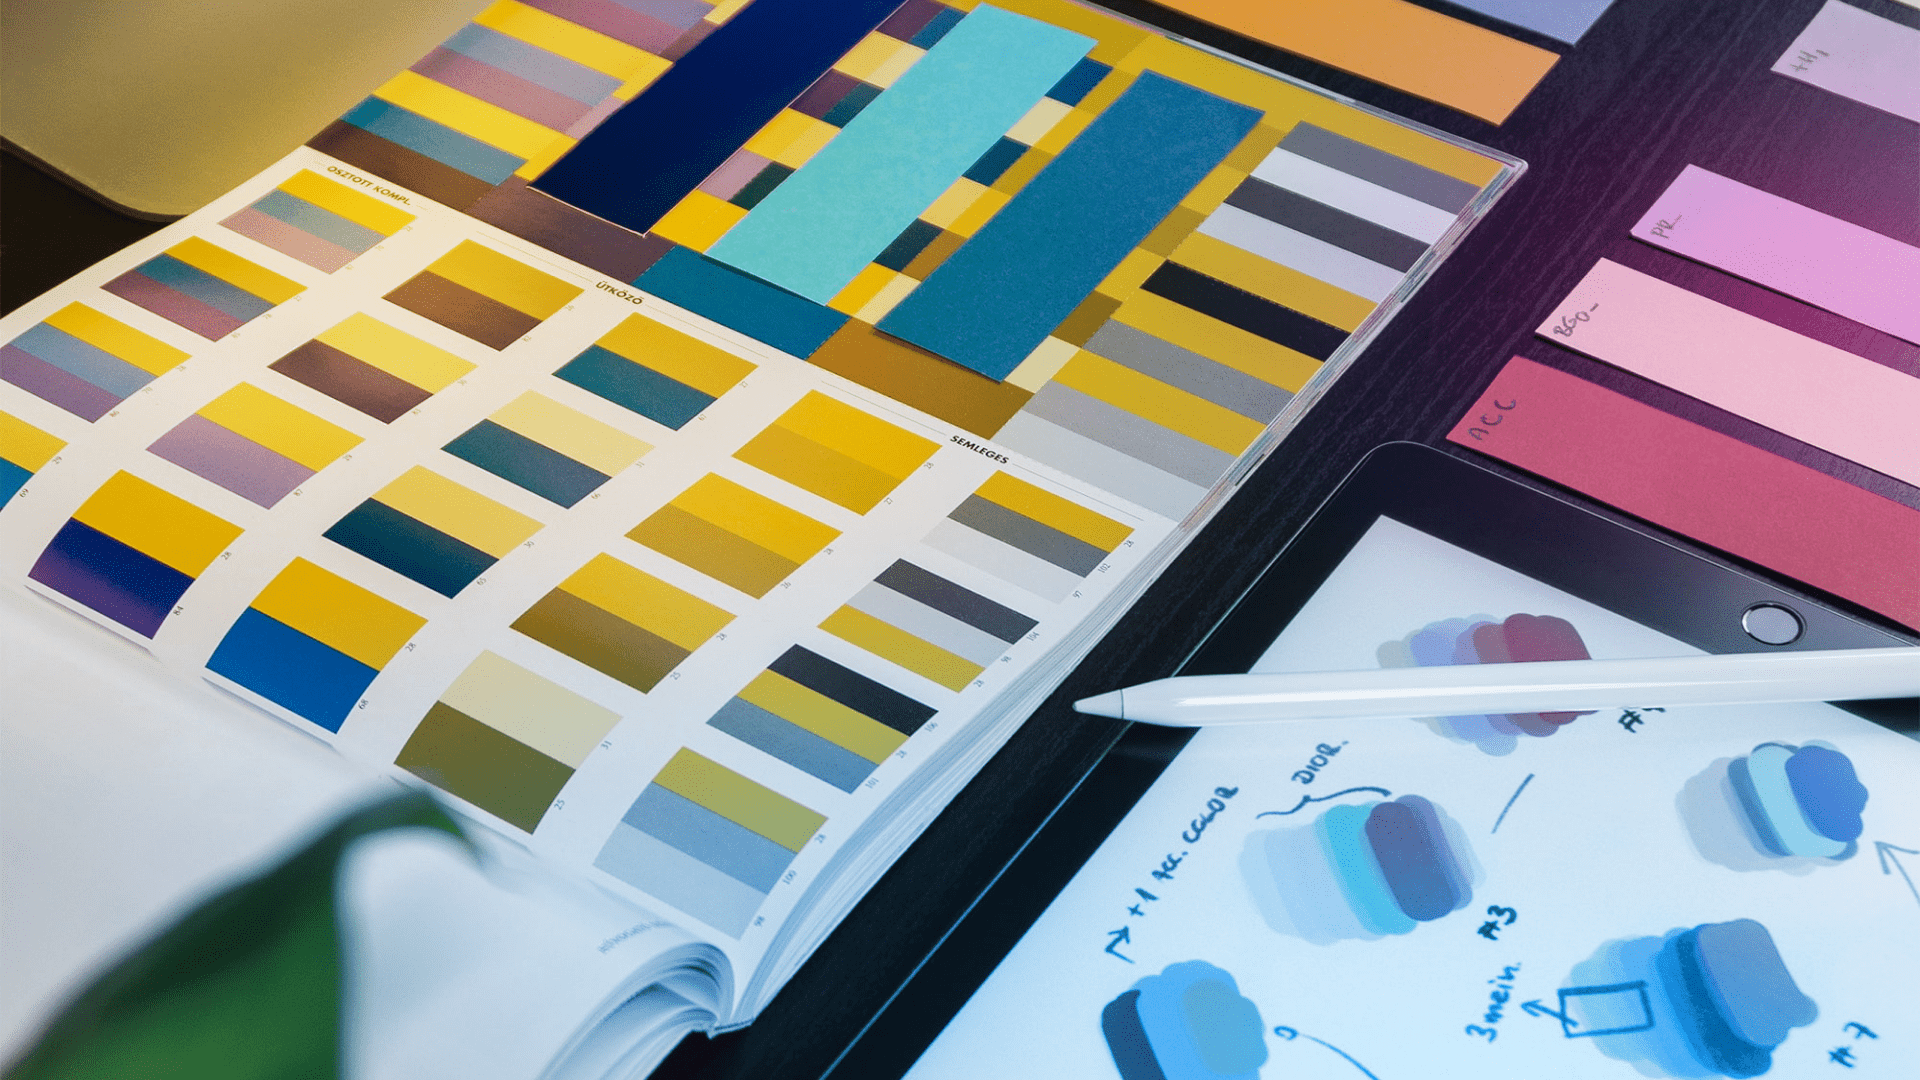 Printed color palette ideas for marketing banners laid on a table